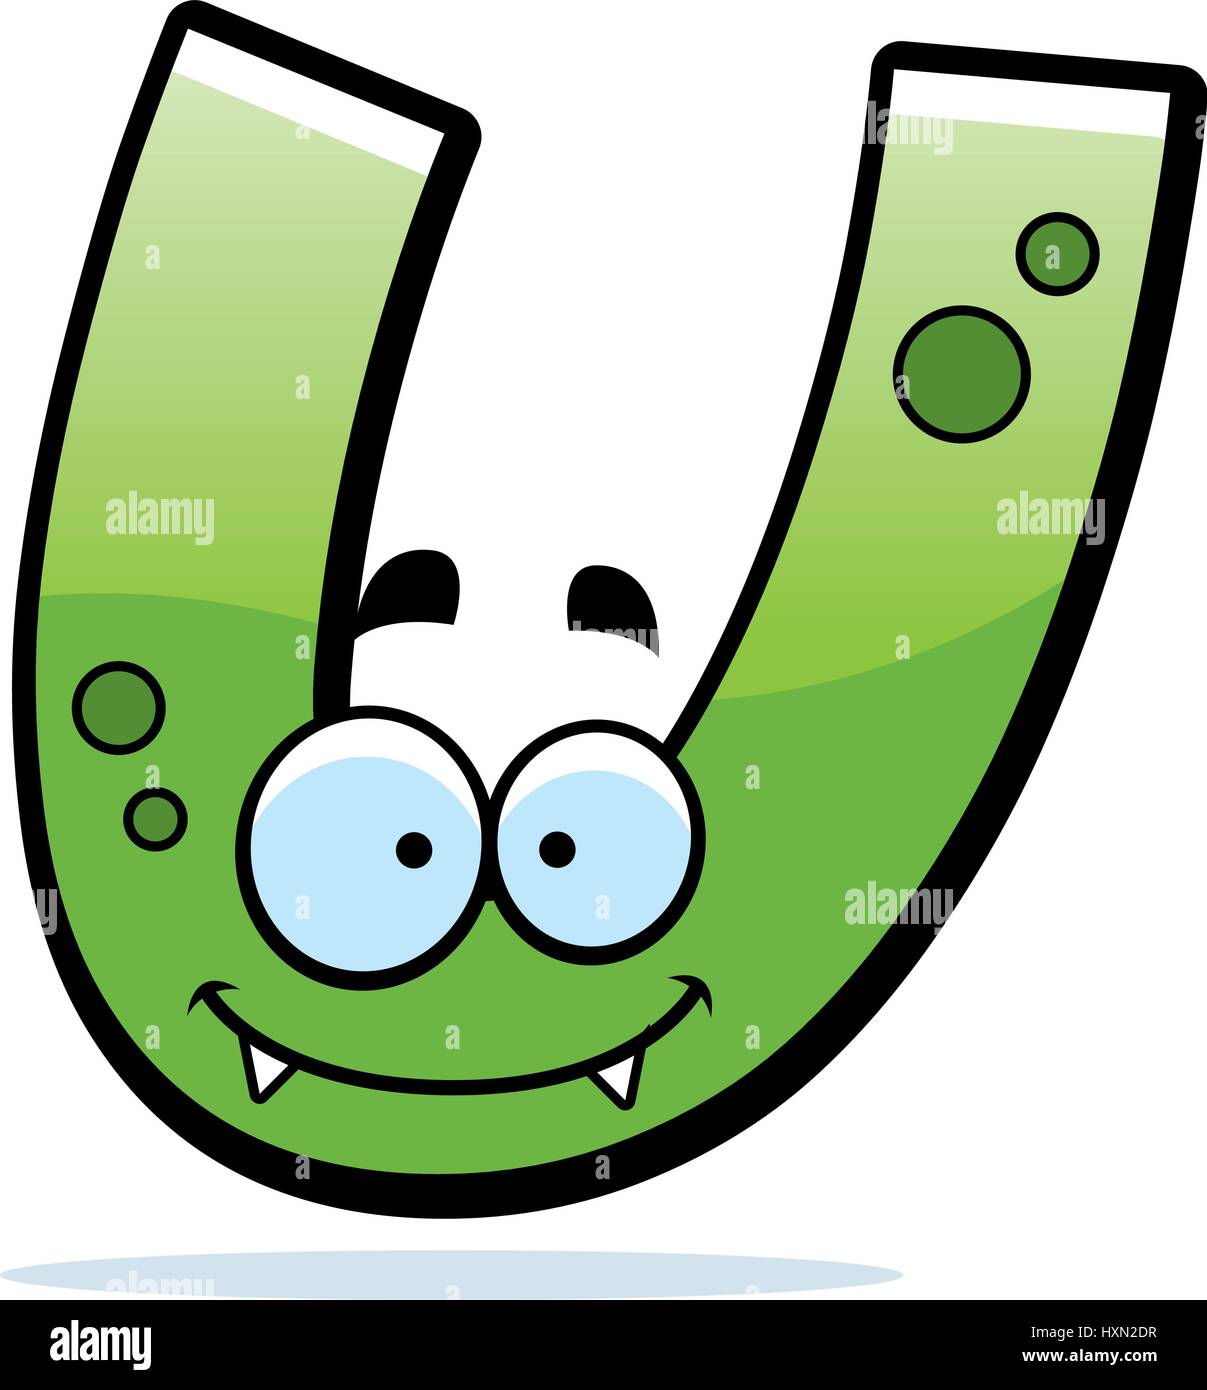 A cartoon illustration of a letter U monster smiling and happy. Stock Vector